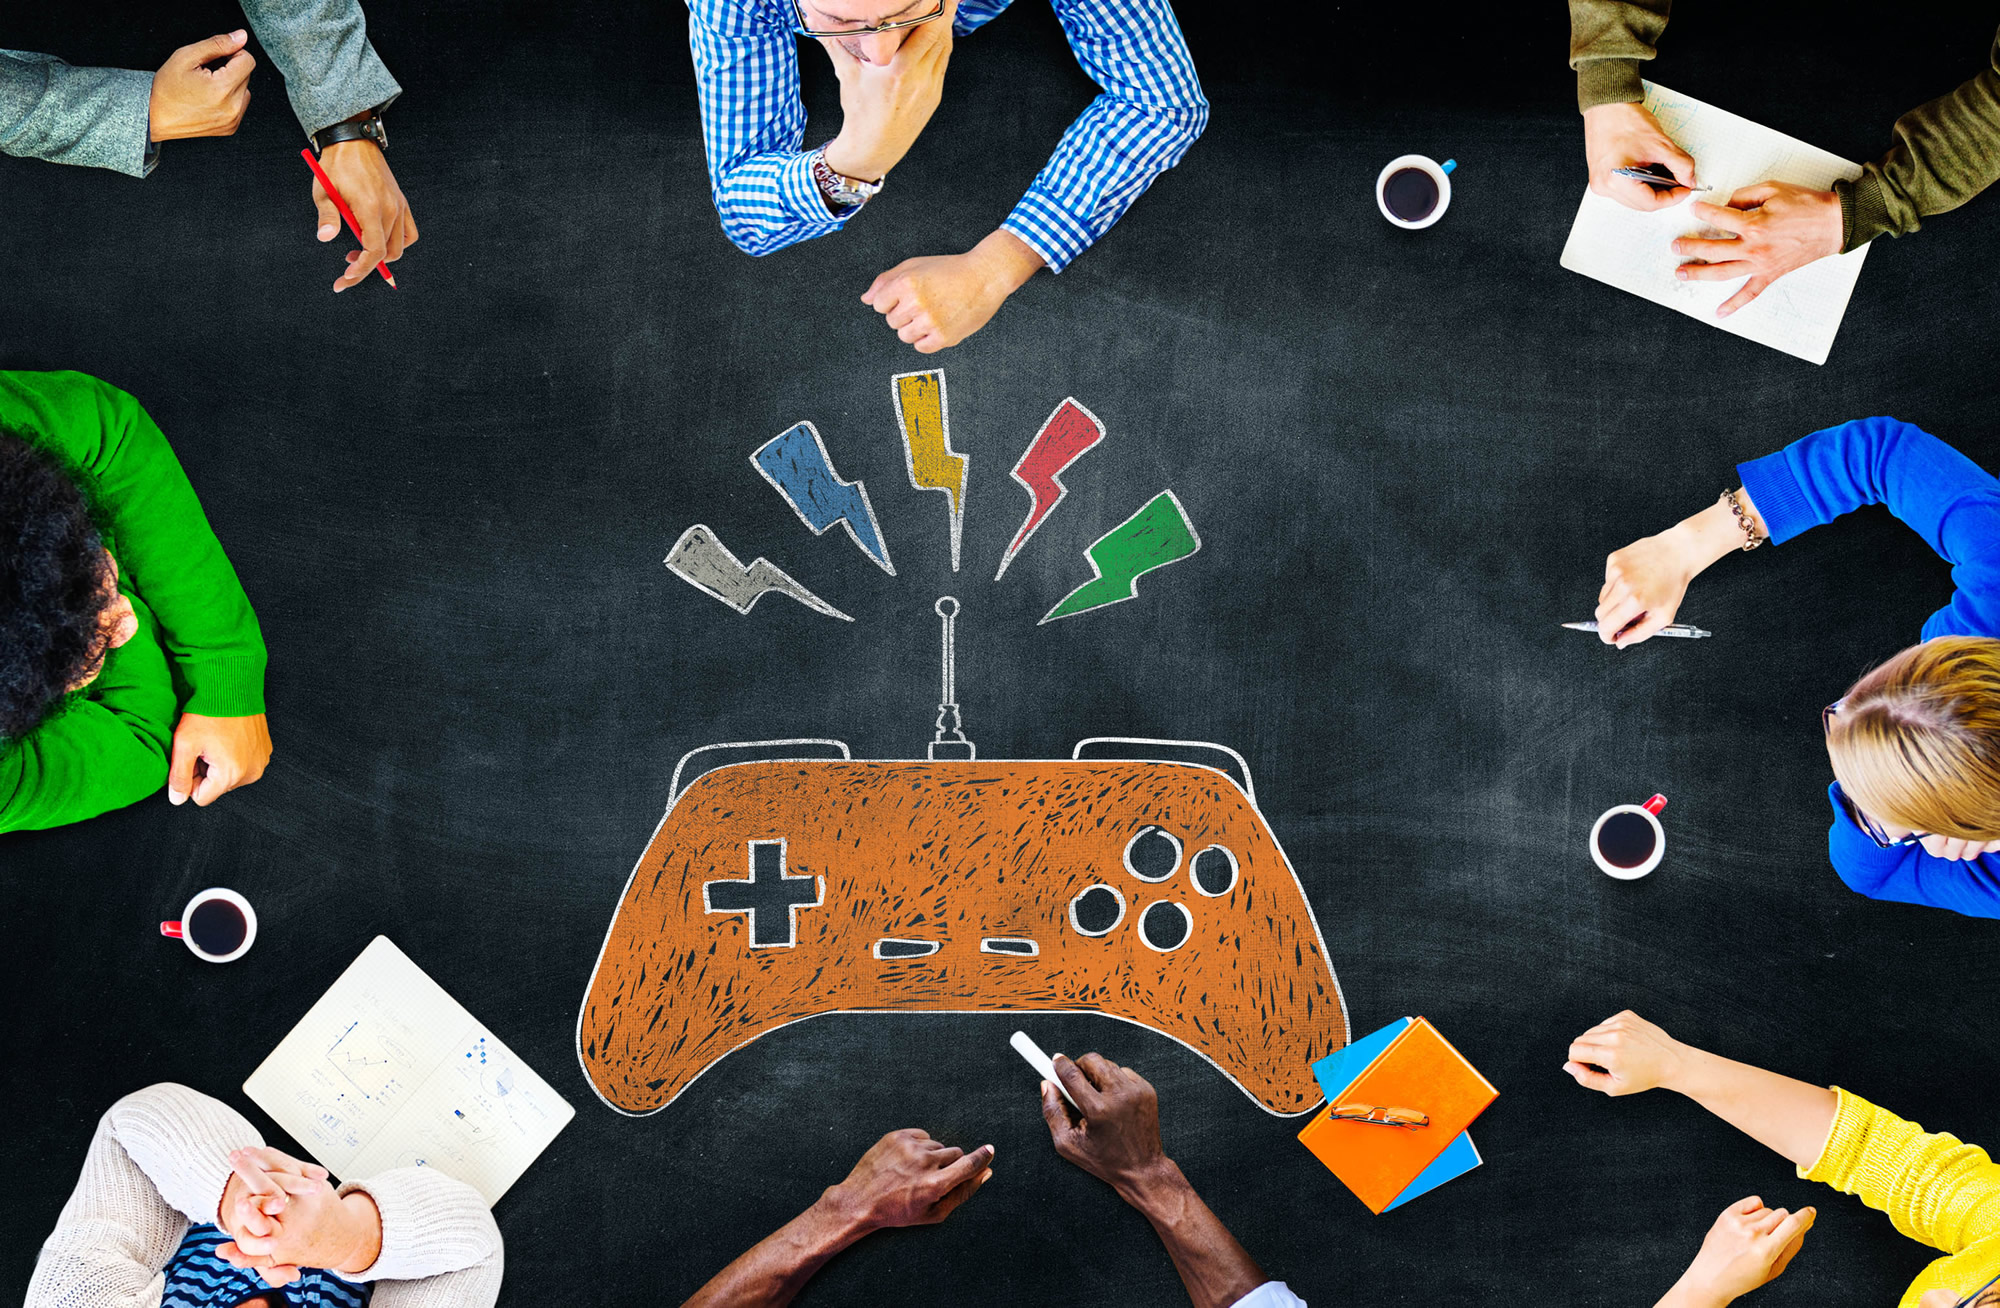 Educational Games and Gamification: Using games to enhance learning.